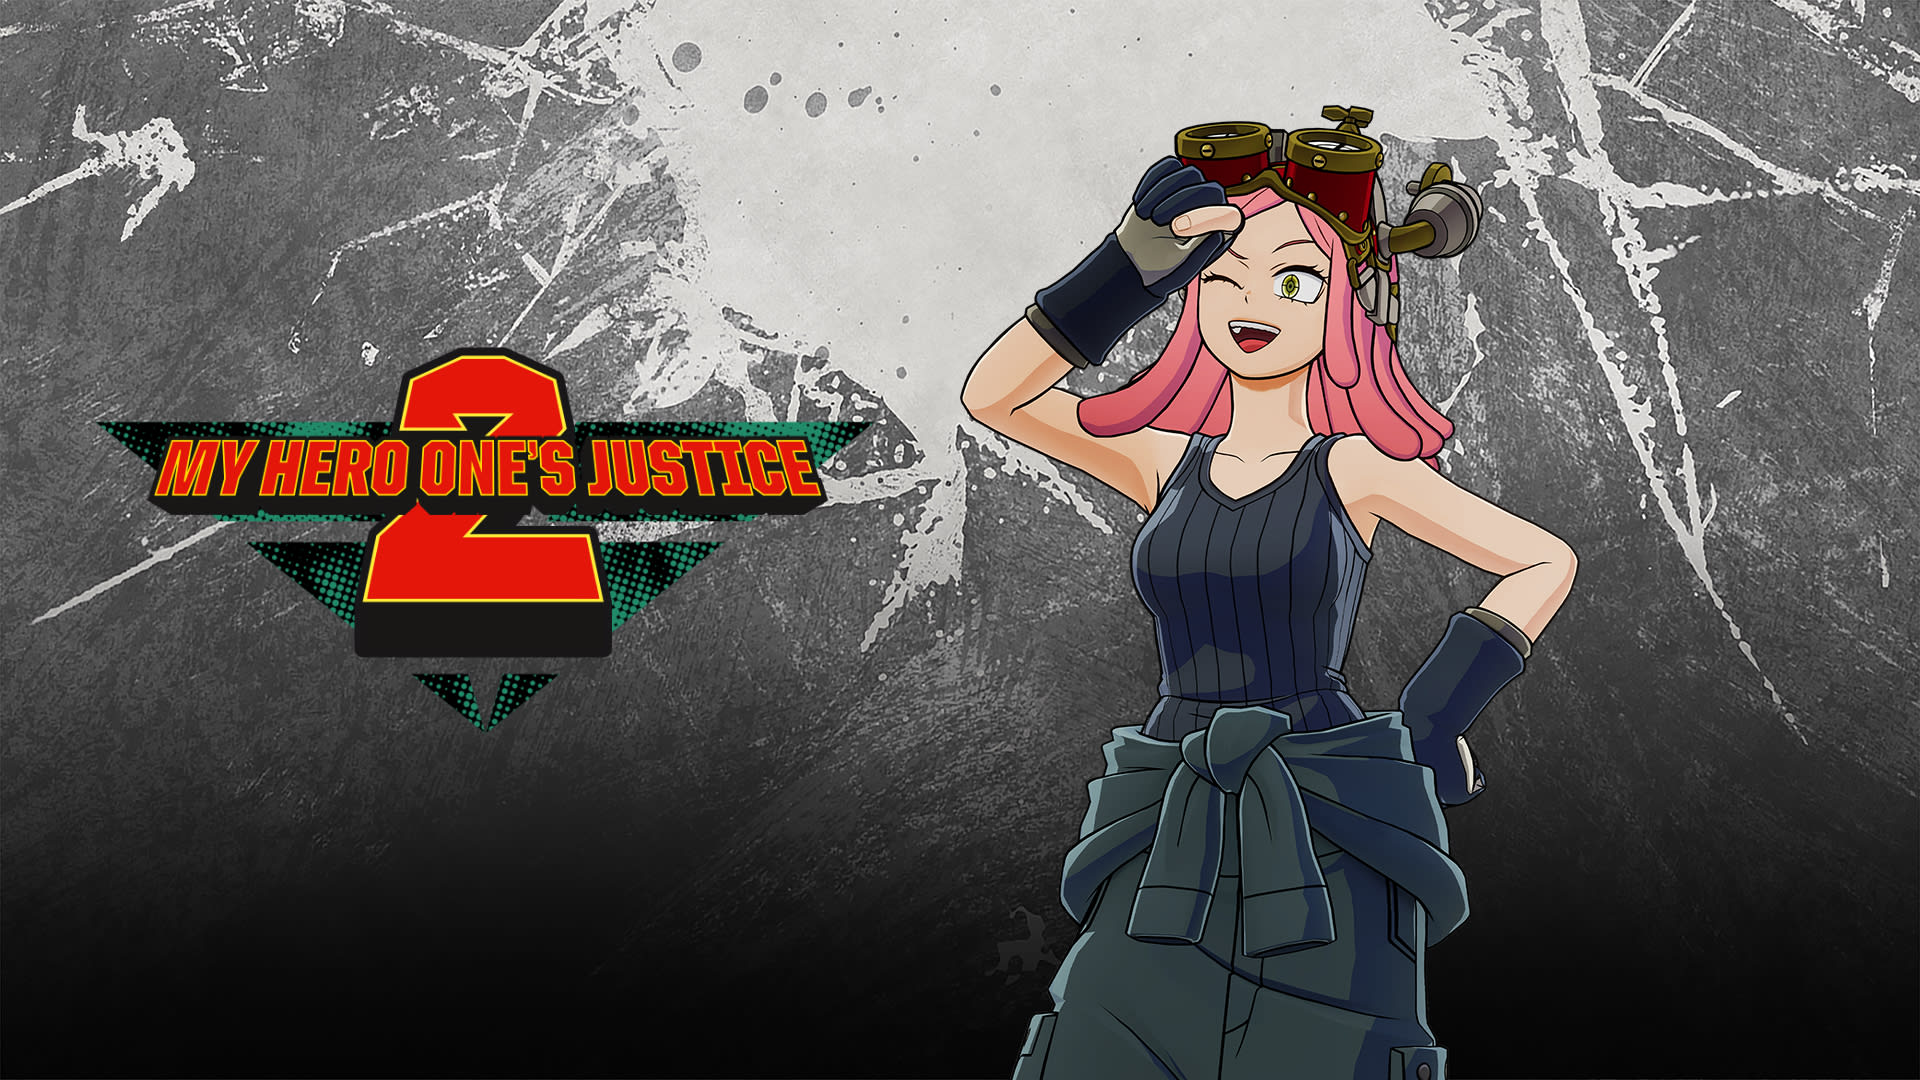 MY HERO ONE'S JUSTICE 2 DLC Pack 2: Mei Hatsume